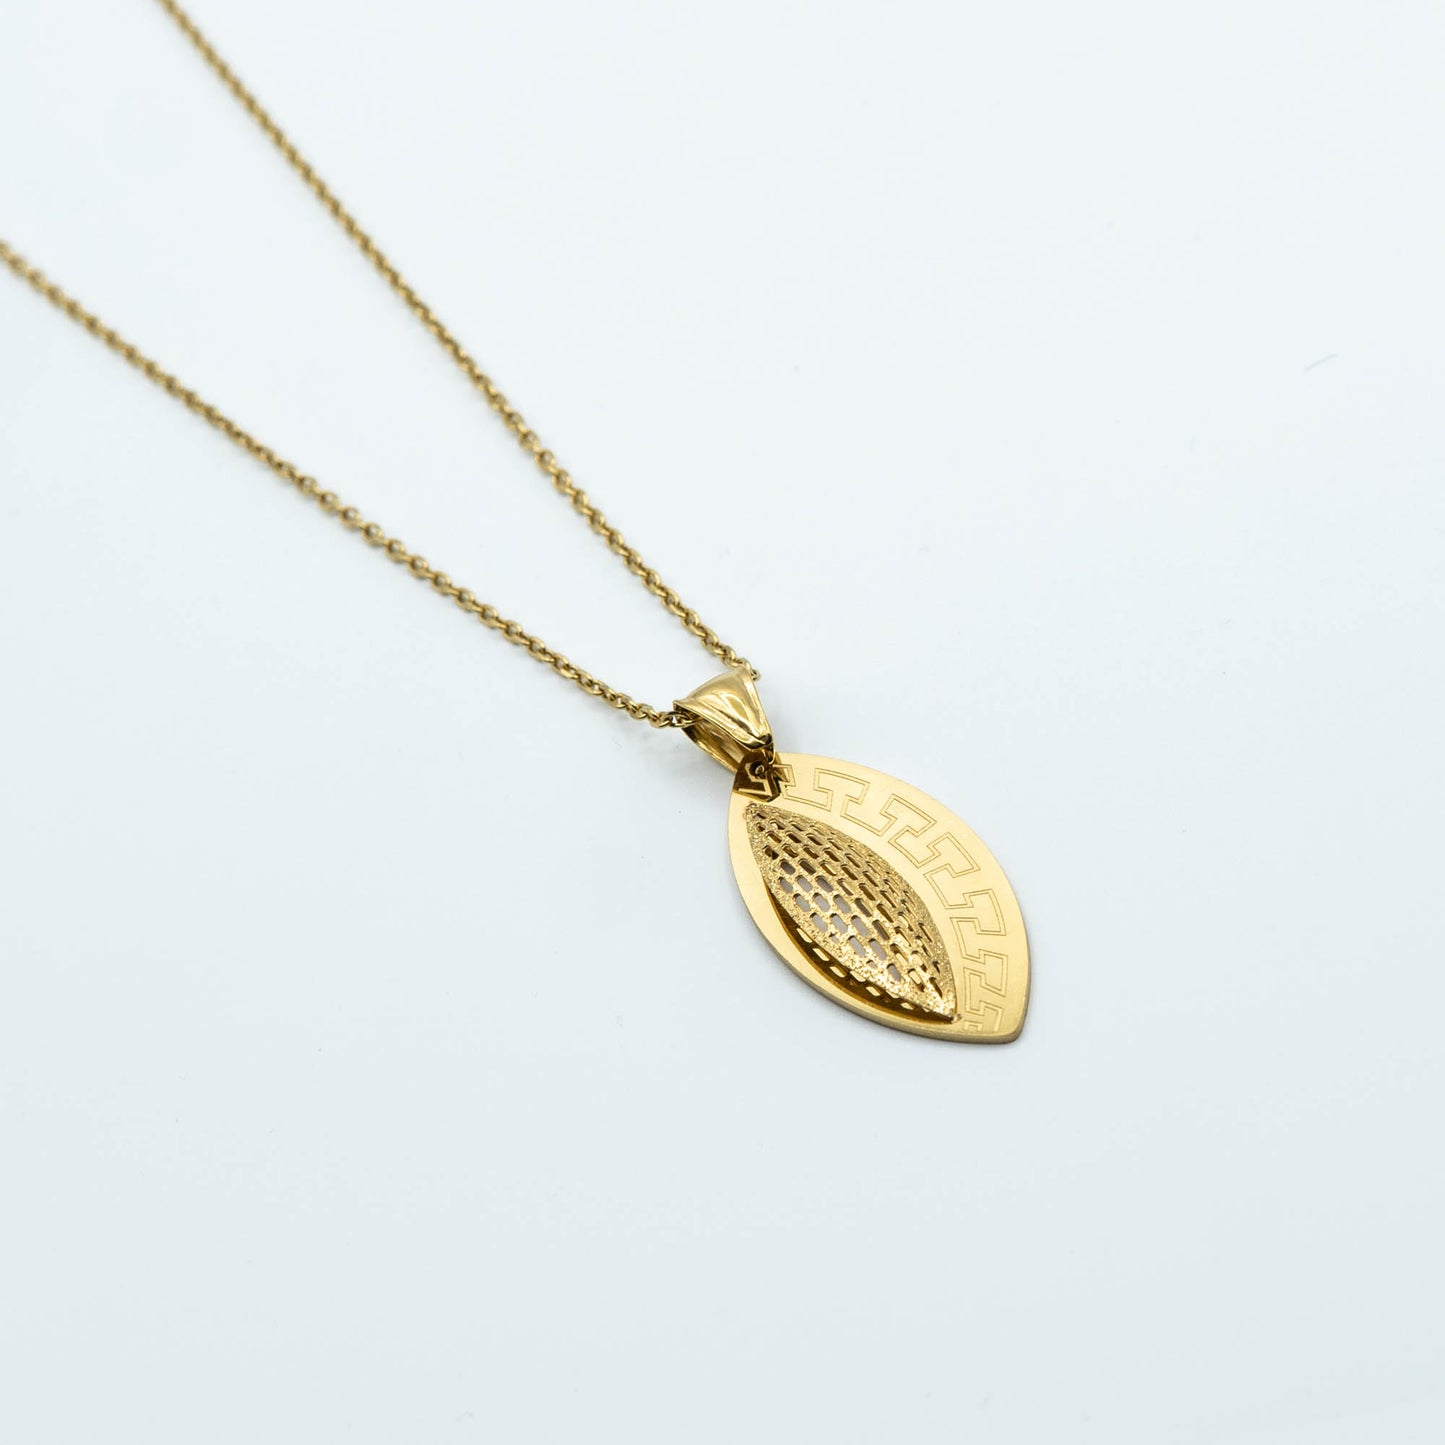 VERA - stainless steel gold tone necklace